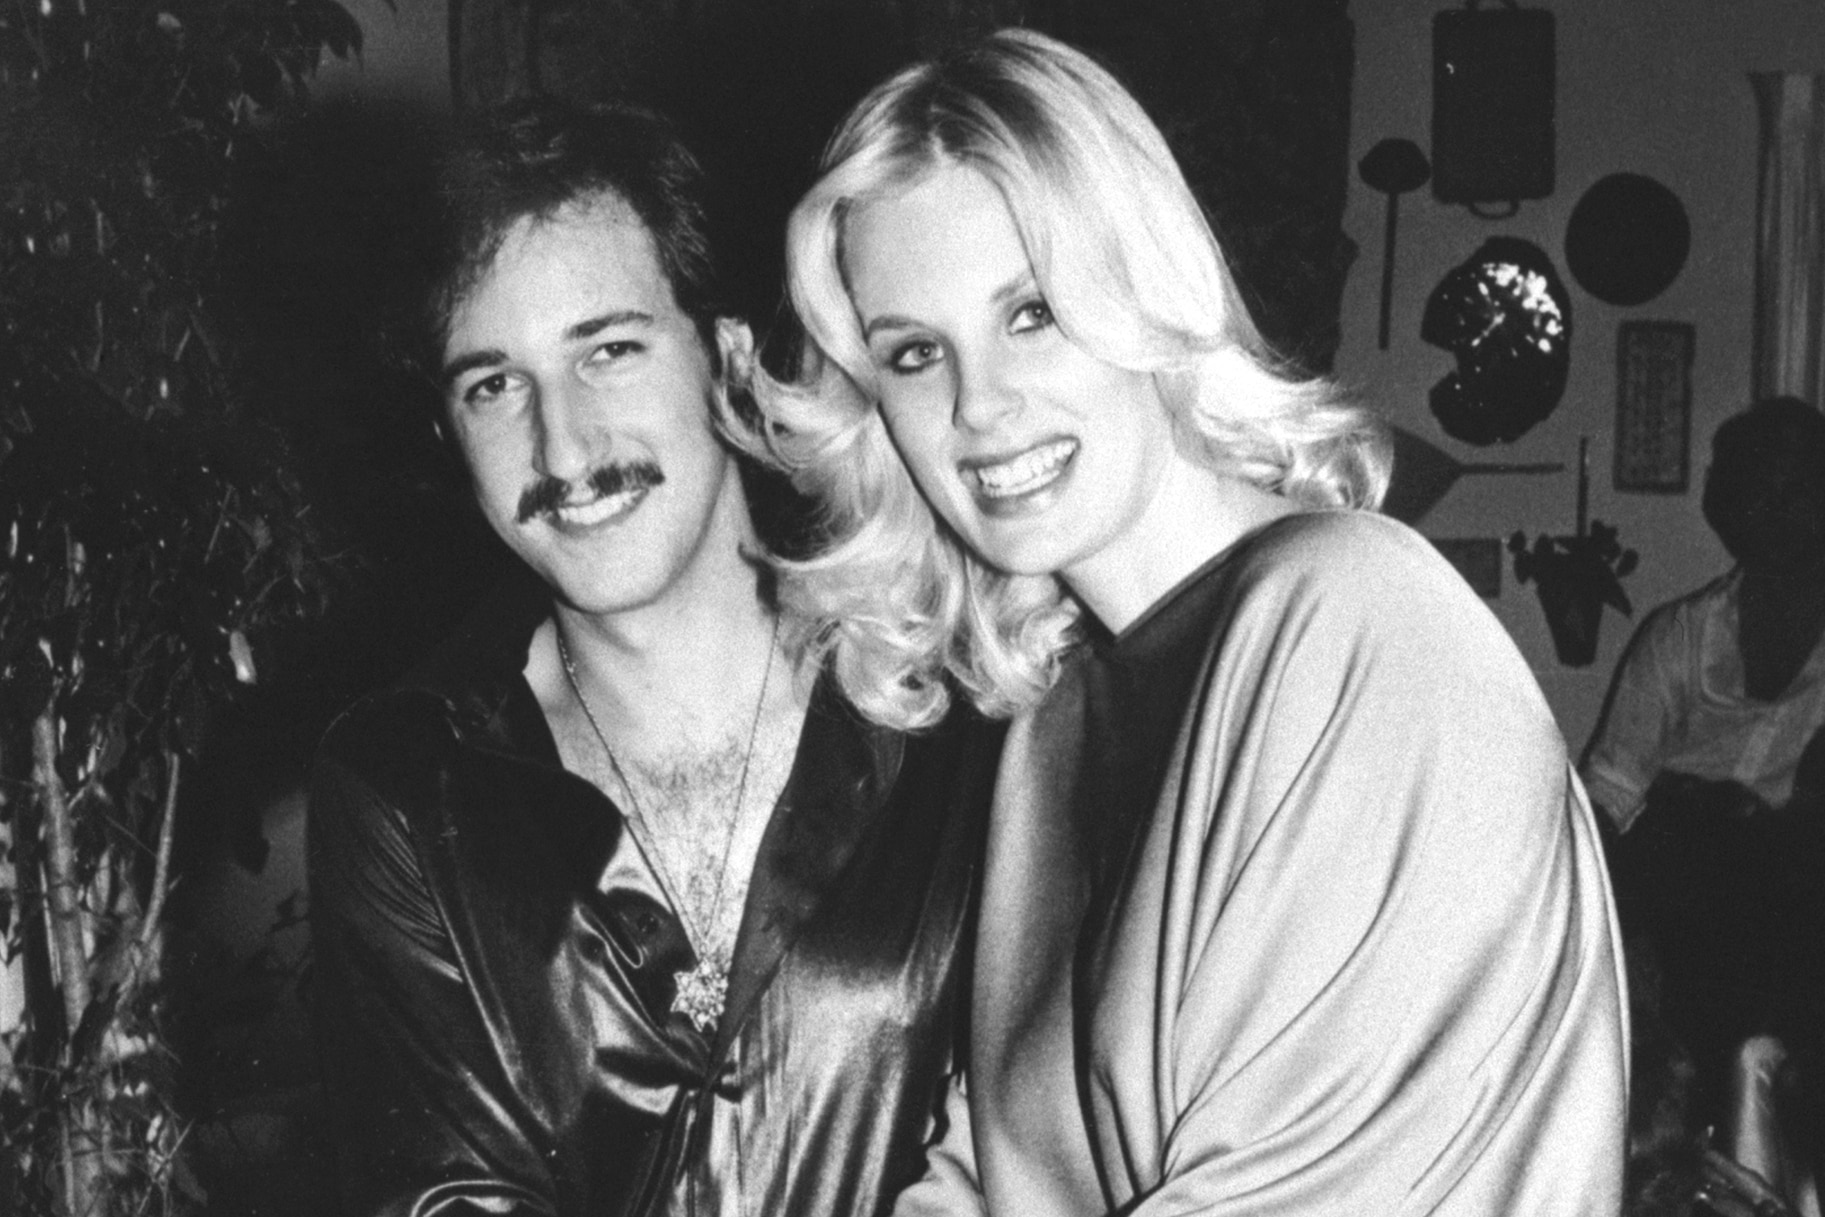 Playboy Magazine's 1980 Playmate of the Year, Dorothy Stratten and Paul Sneider